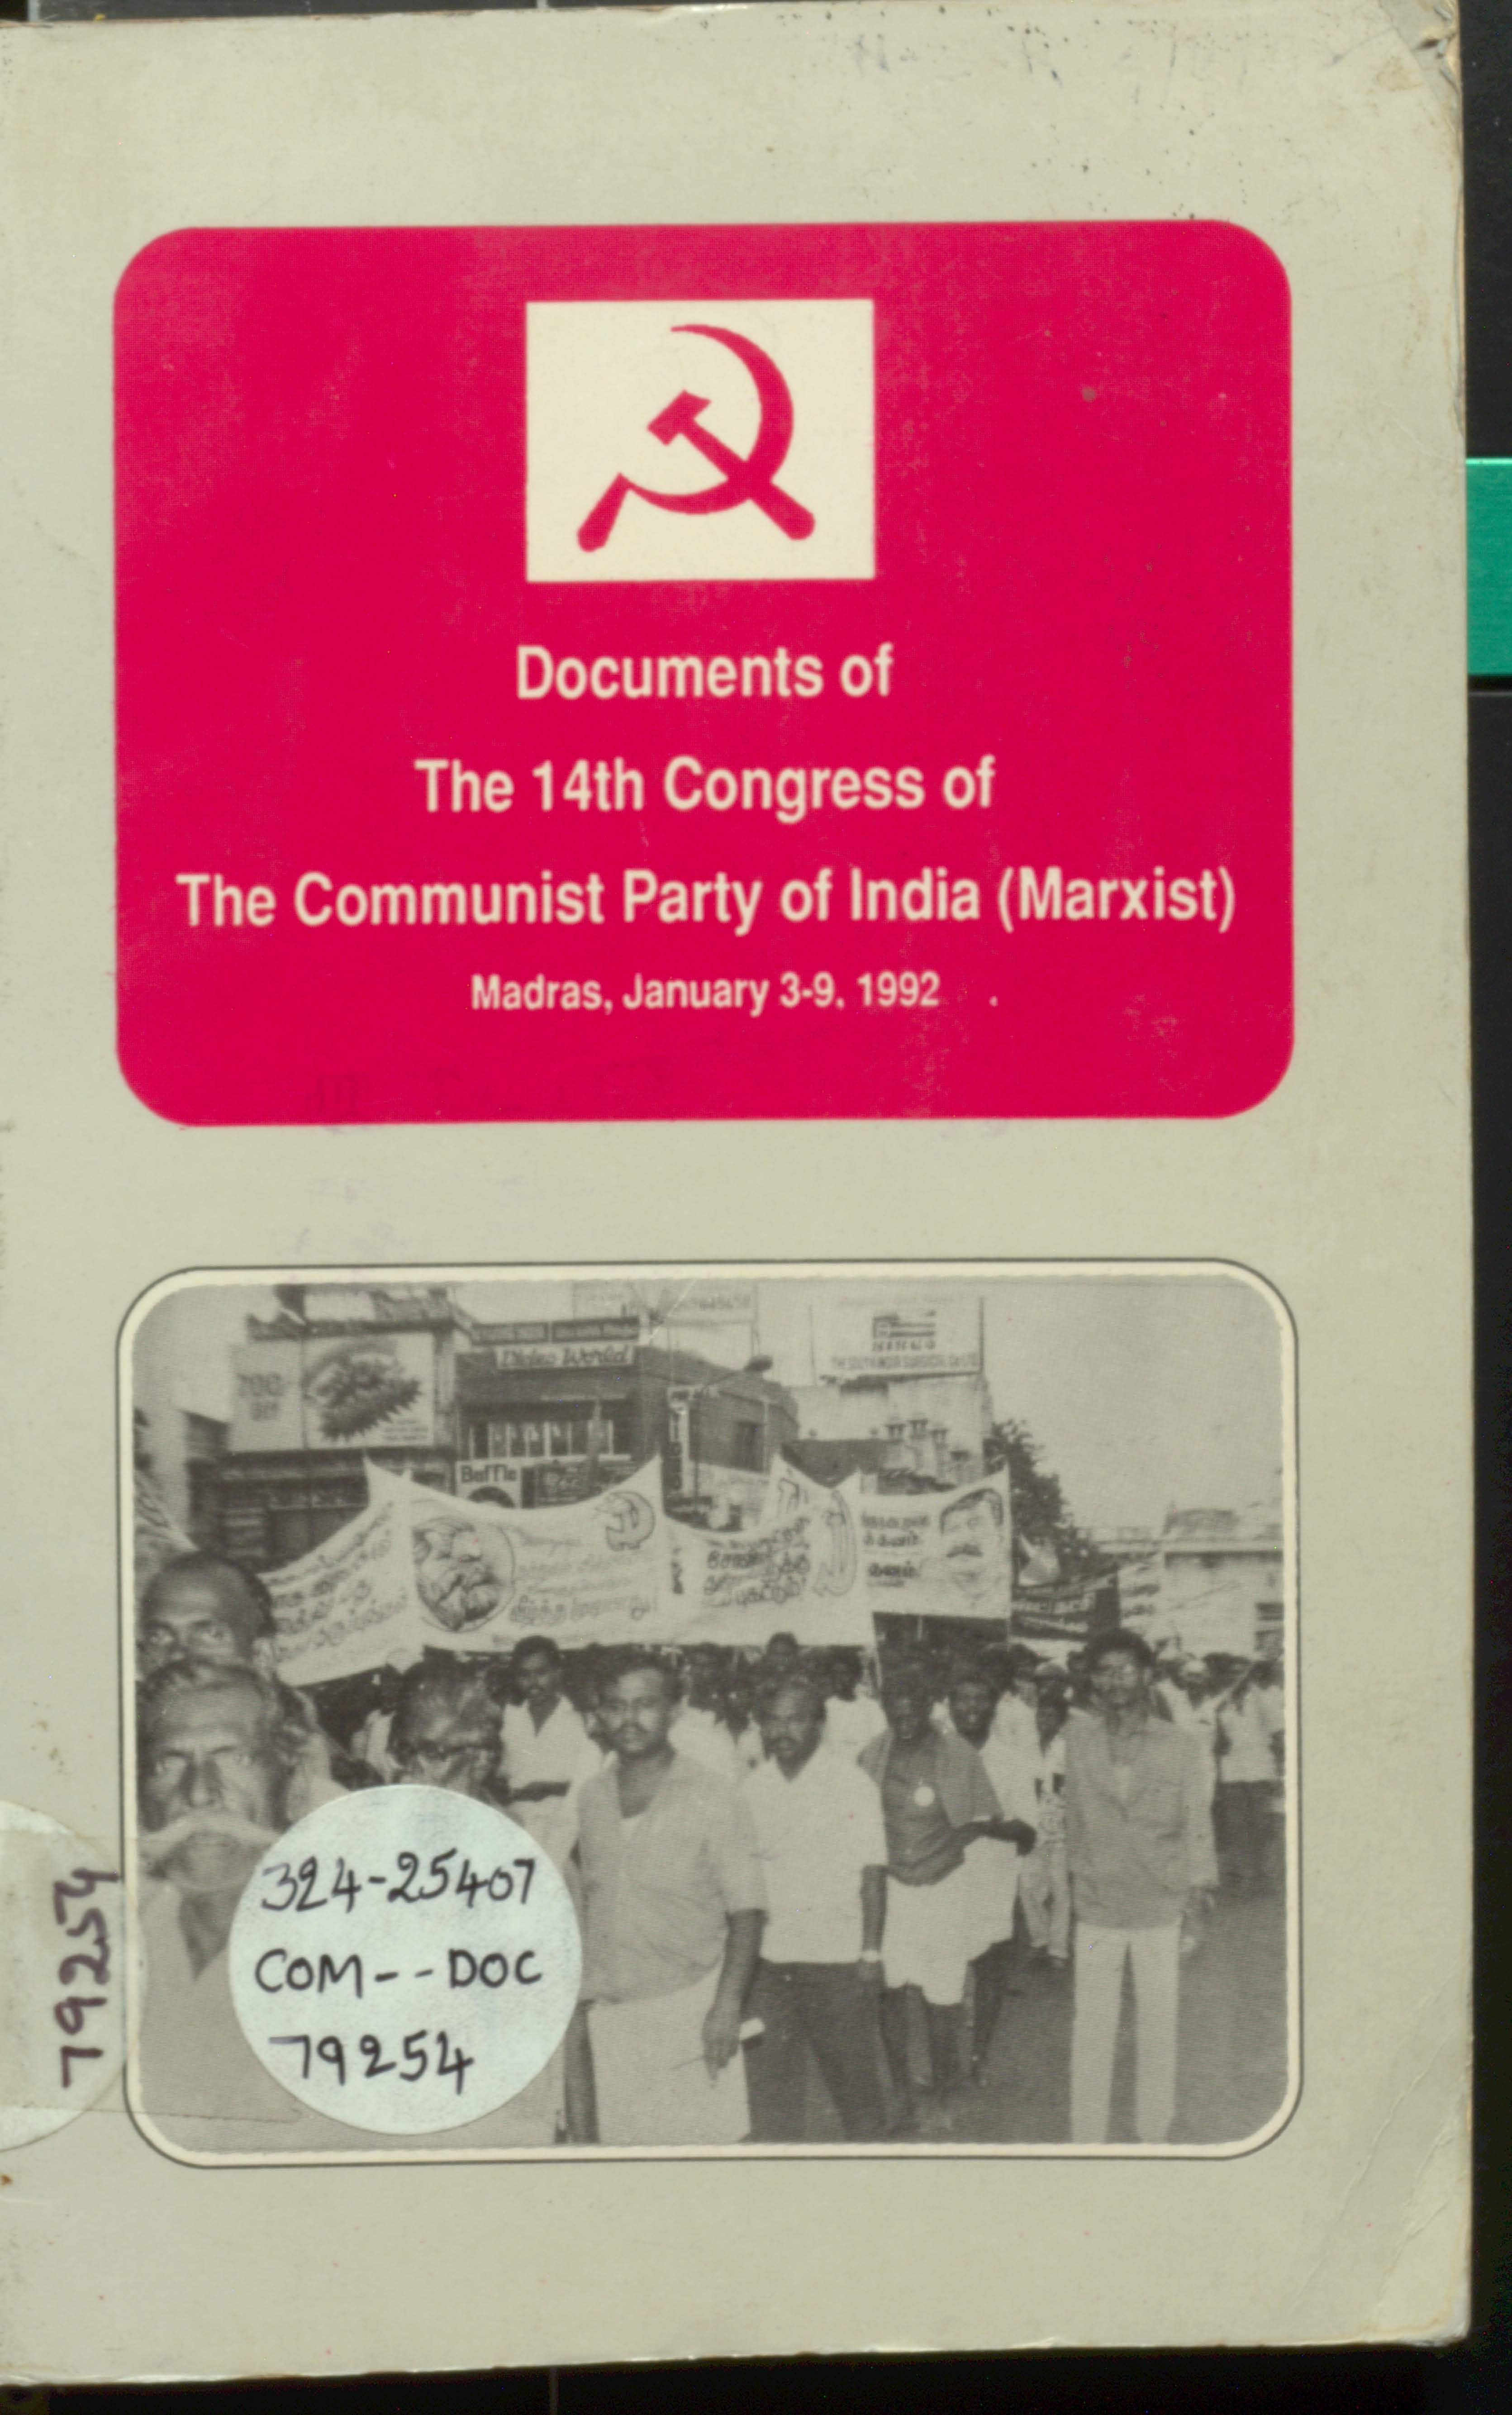 DOCUMENTS OF THE 14th CONGRESS OF THE COMMUNIST PARTY OF INDIA (marxist) madras, january 3-9,1992